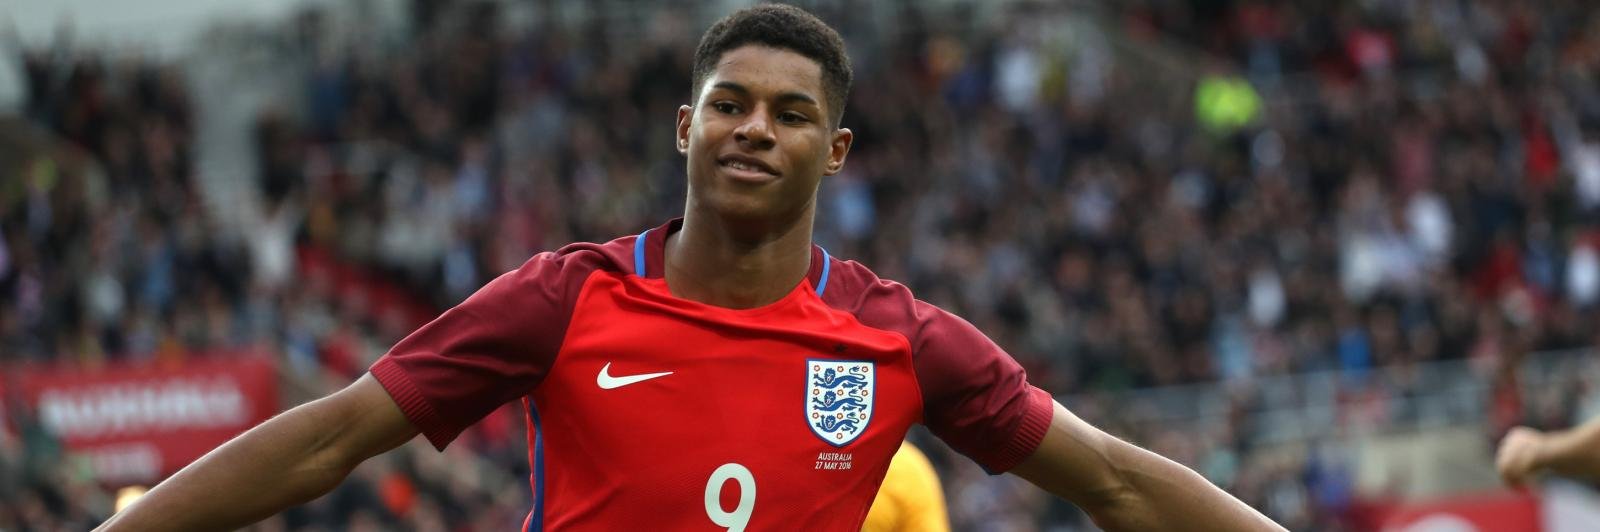 Euro 2016 Q&A: Mystery Jets’ Kapil Trivedi believes Marcus Rashford and England will impress in France